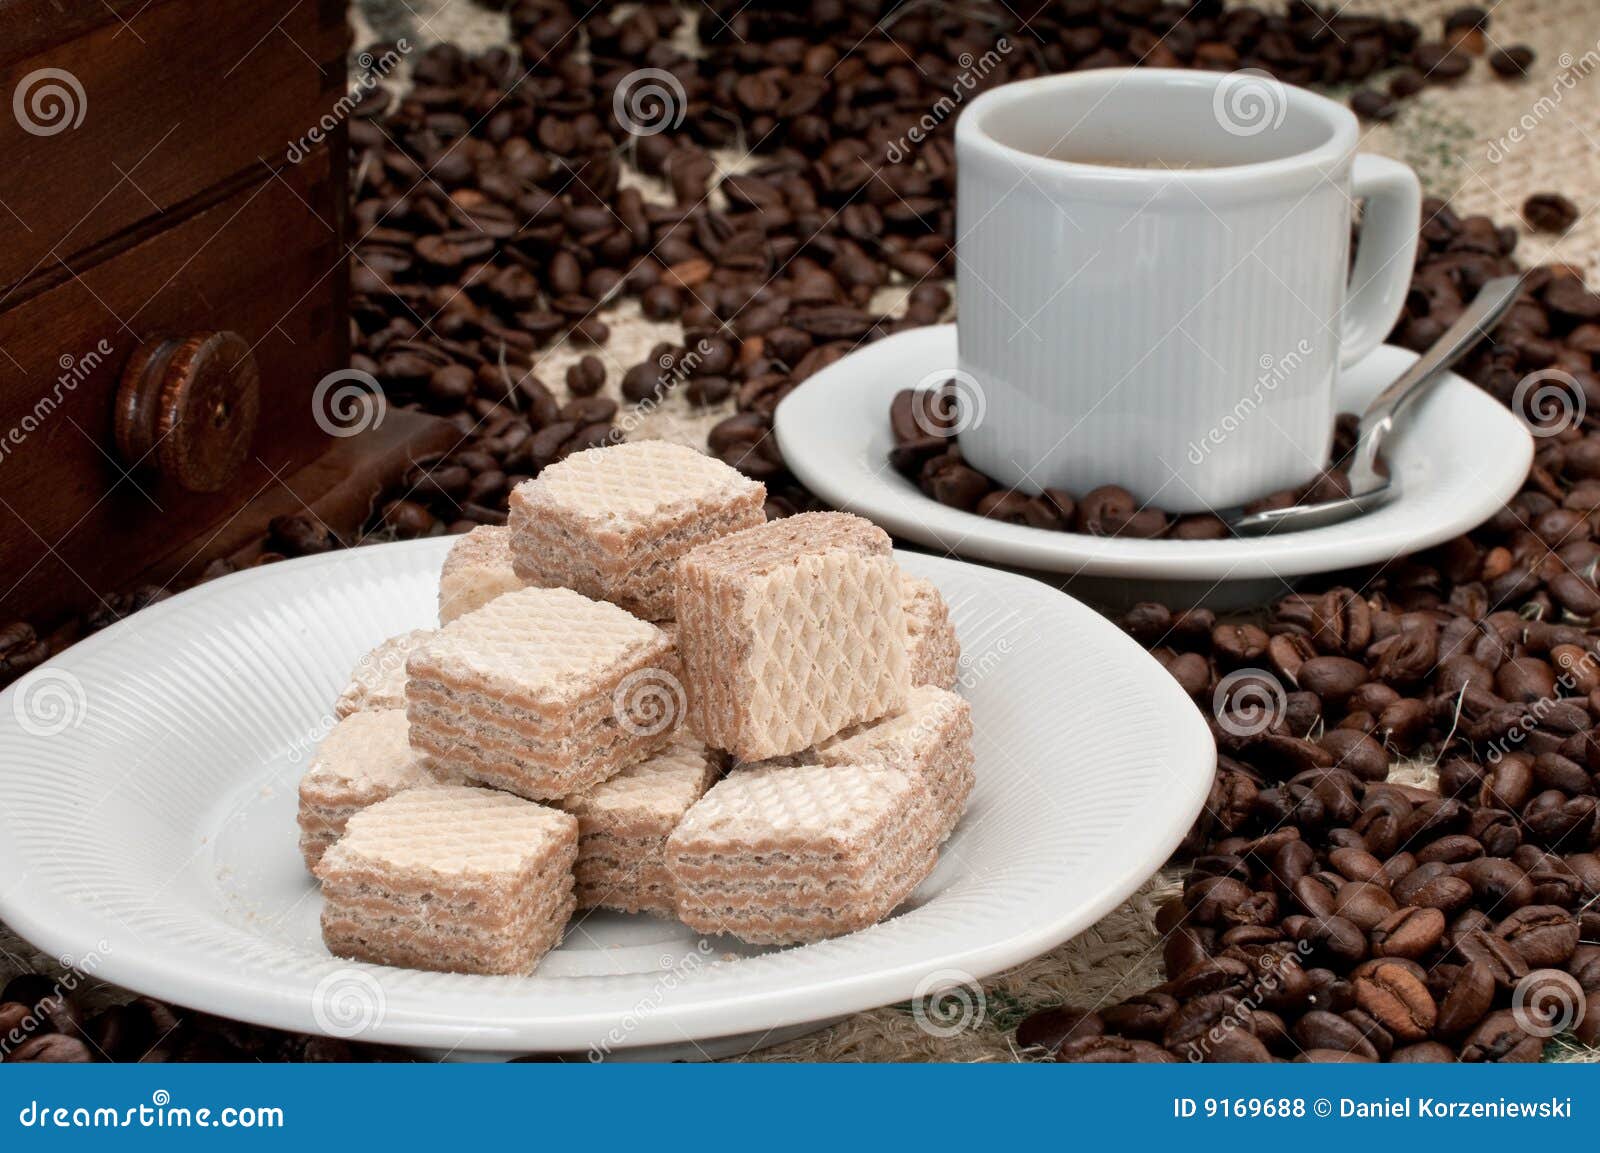 Wafer Cookies and Coffee Beans Stock Photo - Image of bean, exotic: 9169688